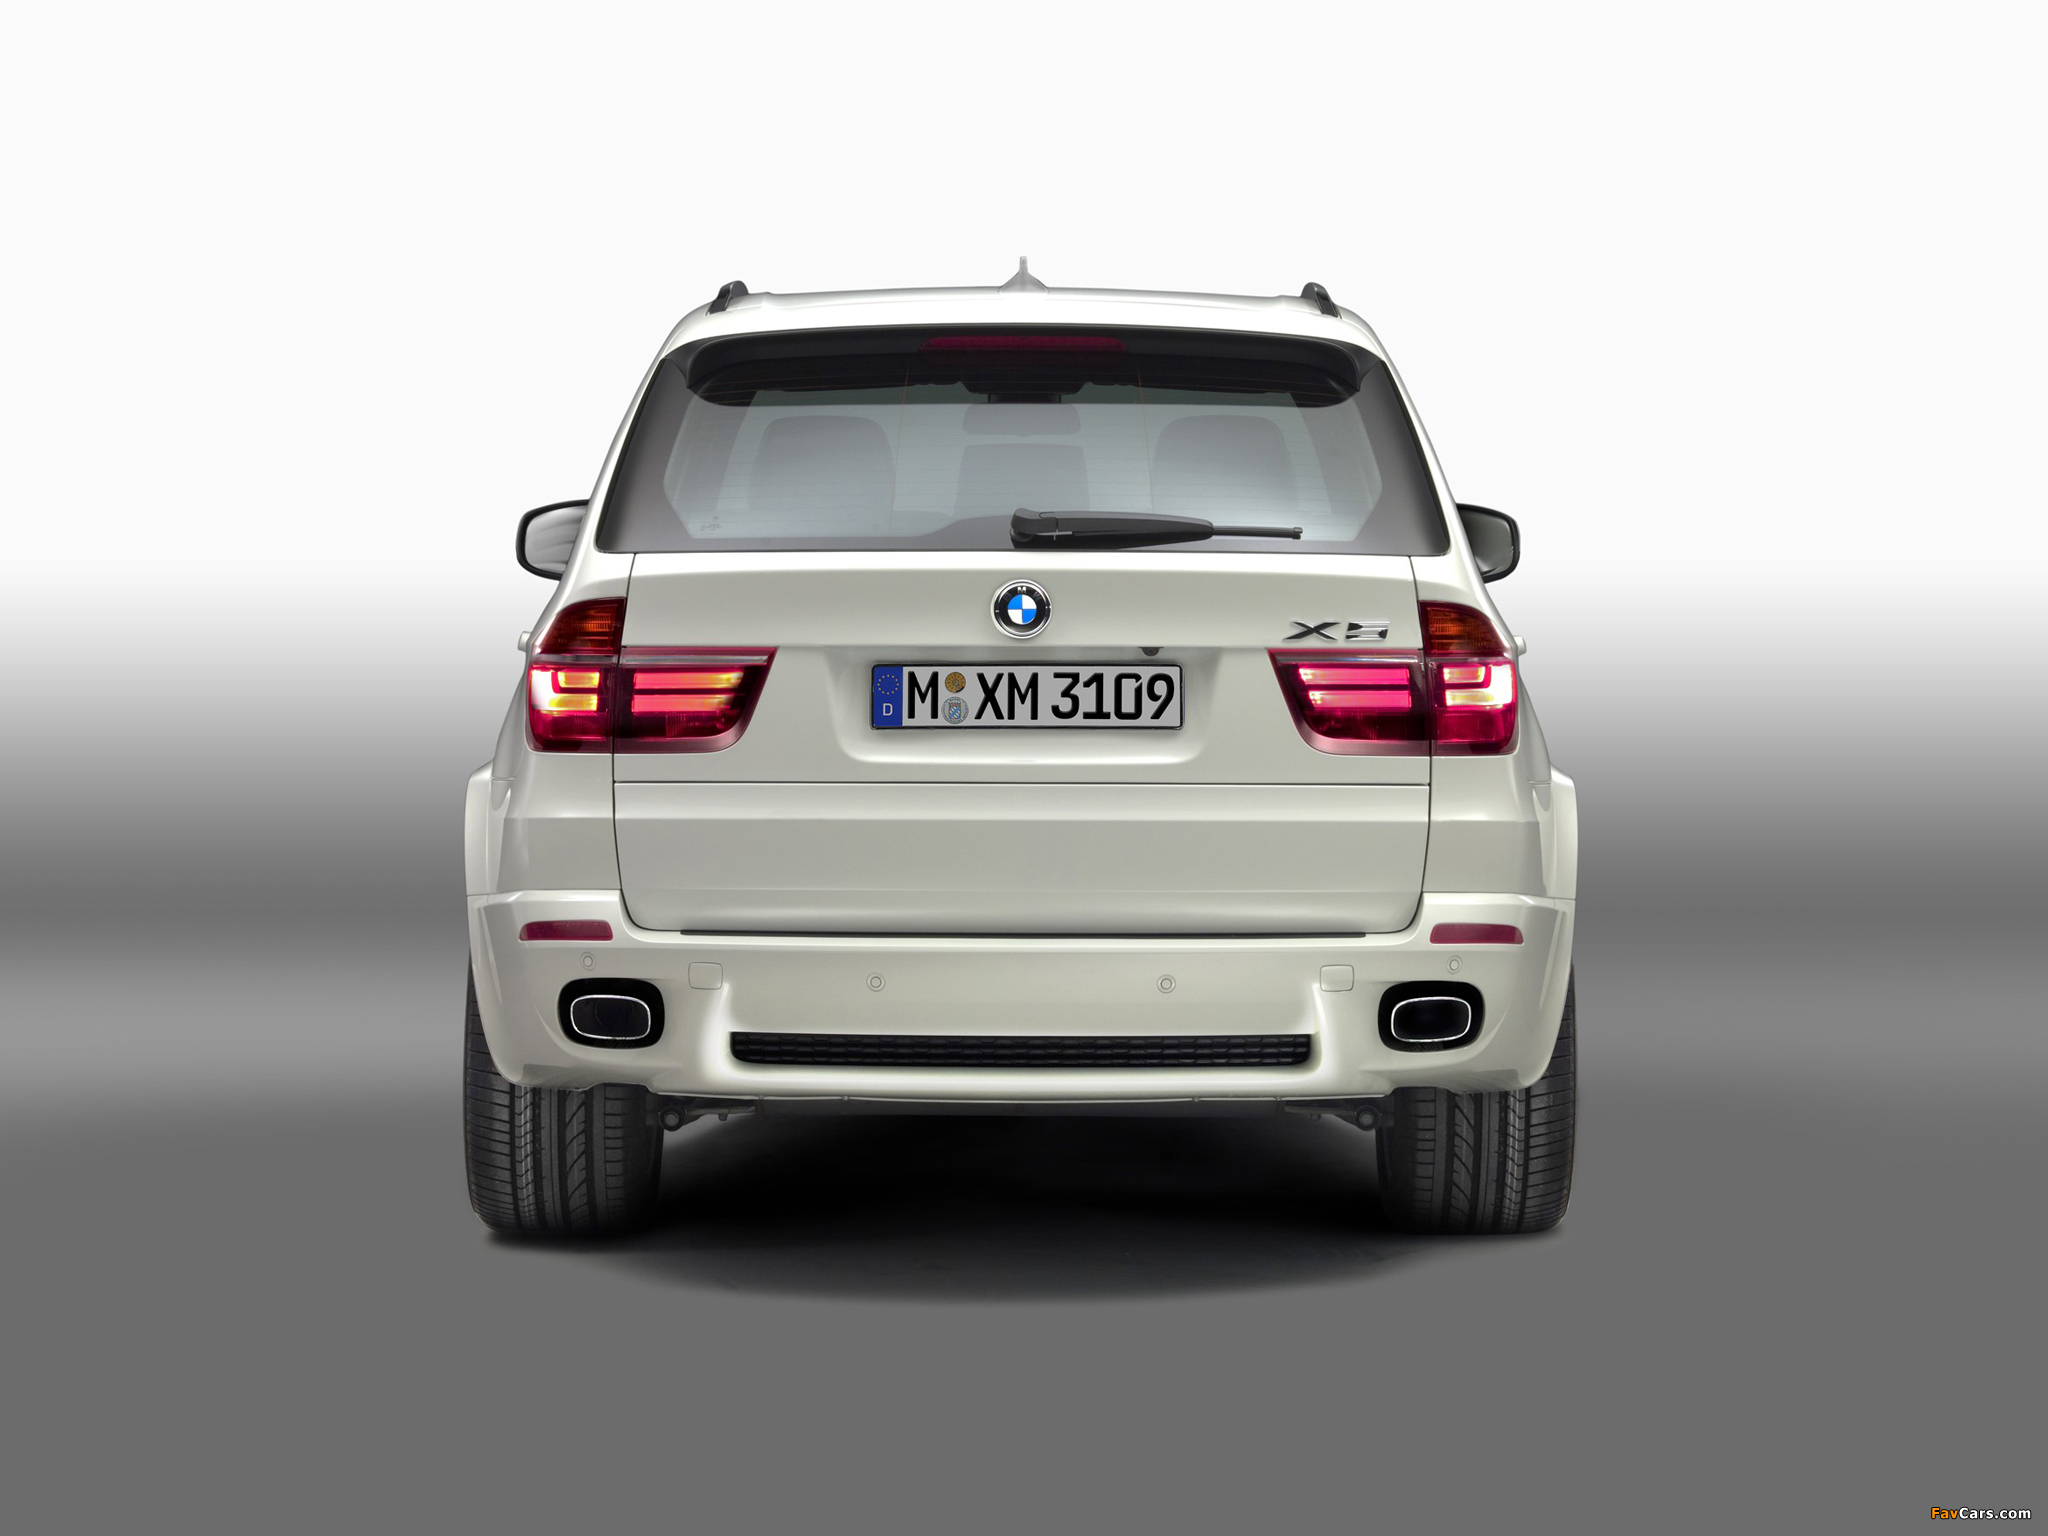 BMW X5 xDrive50i M Sports Package (E70) 2010 images (2048 x 1536)